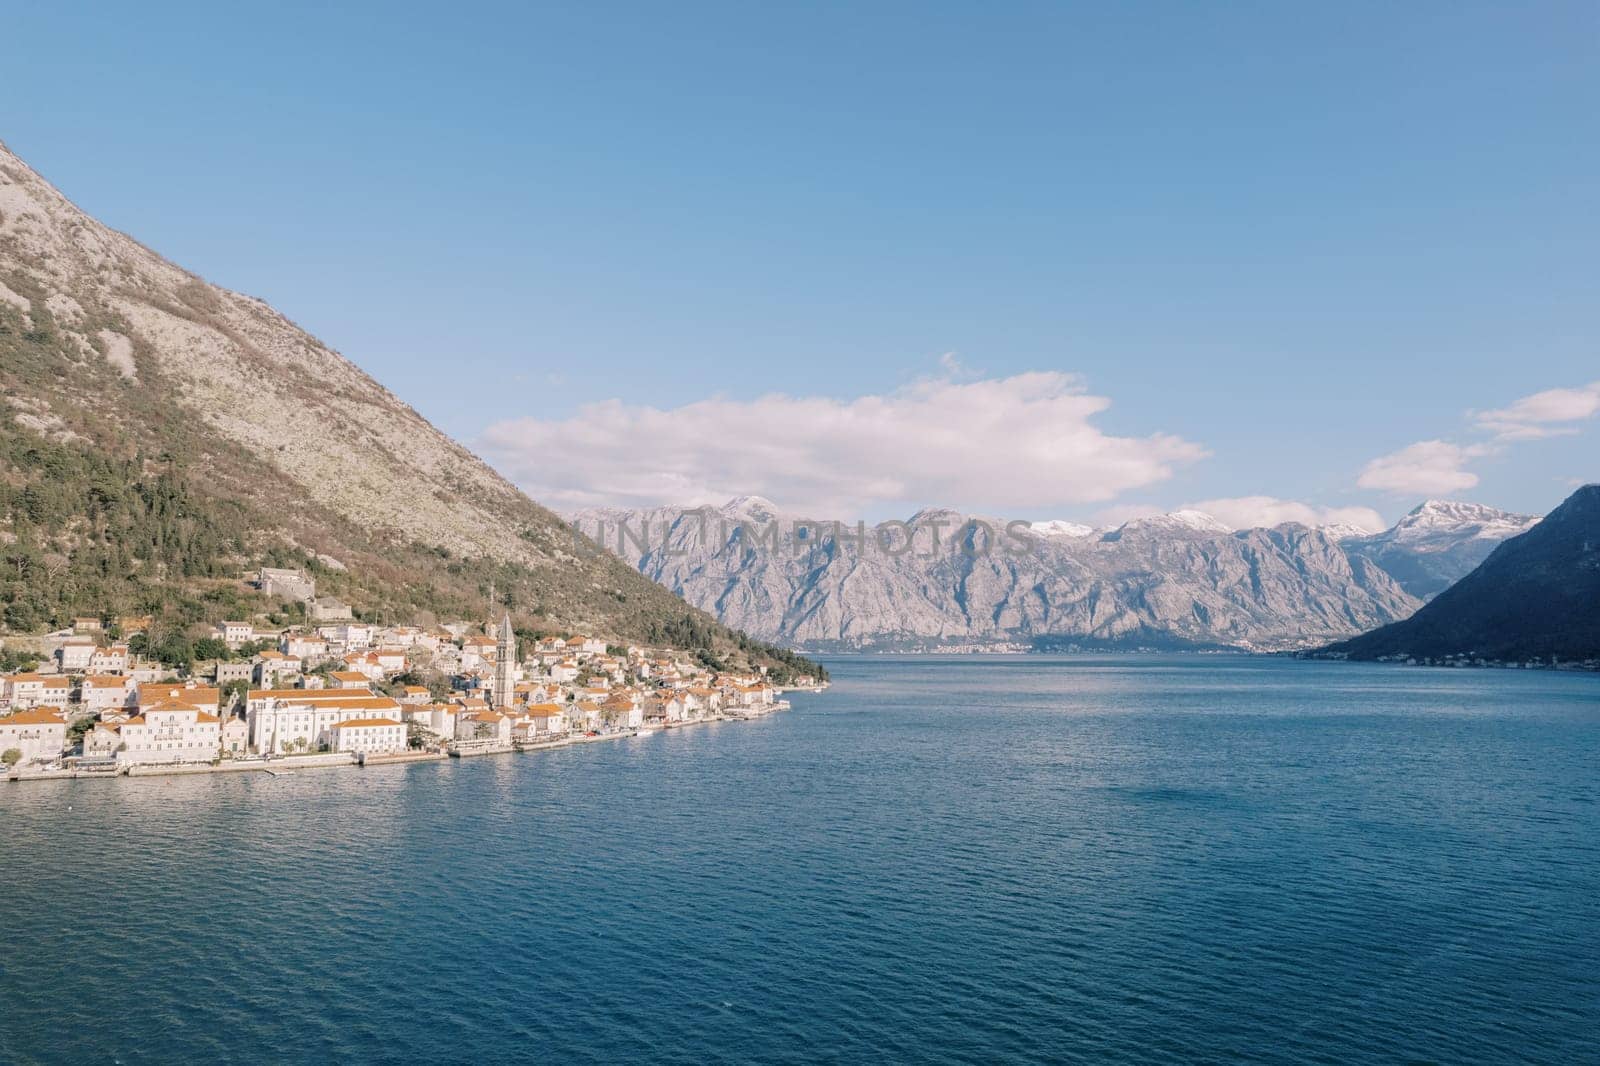 View from the sea on the coast of the ancient town of Perast at the foot of the mountains. Montenegro. Drone by Nadtochiy